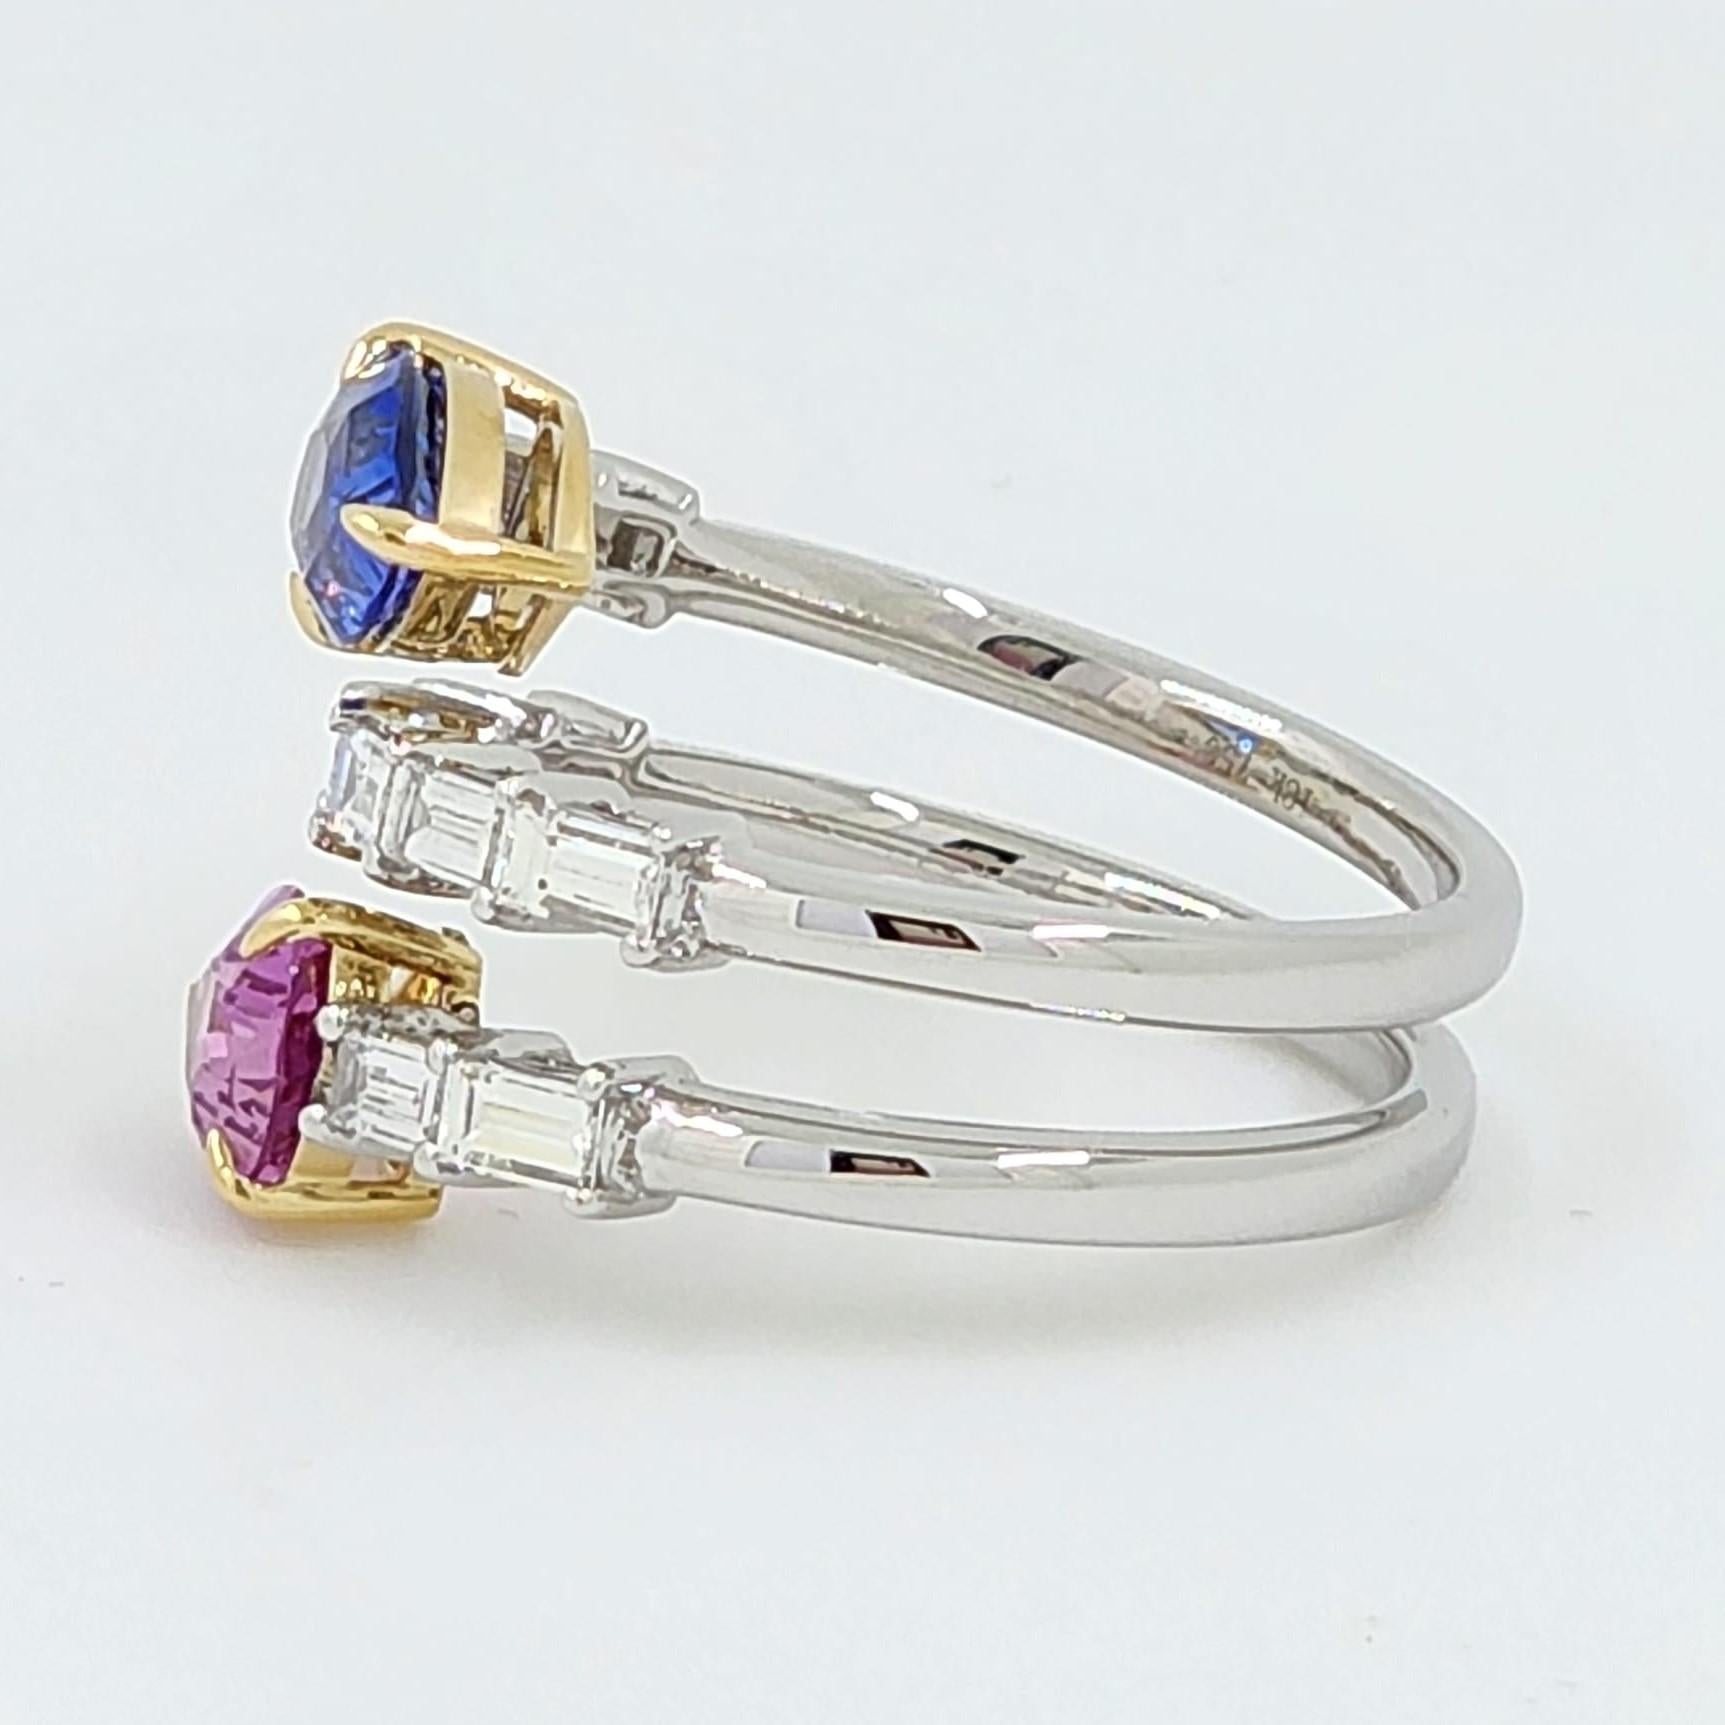 Pear Cut Pear Shape Blue and Pink Sapphire Diamond Ring in 18 Karat Yellow and White Gold